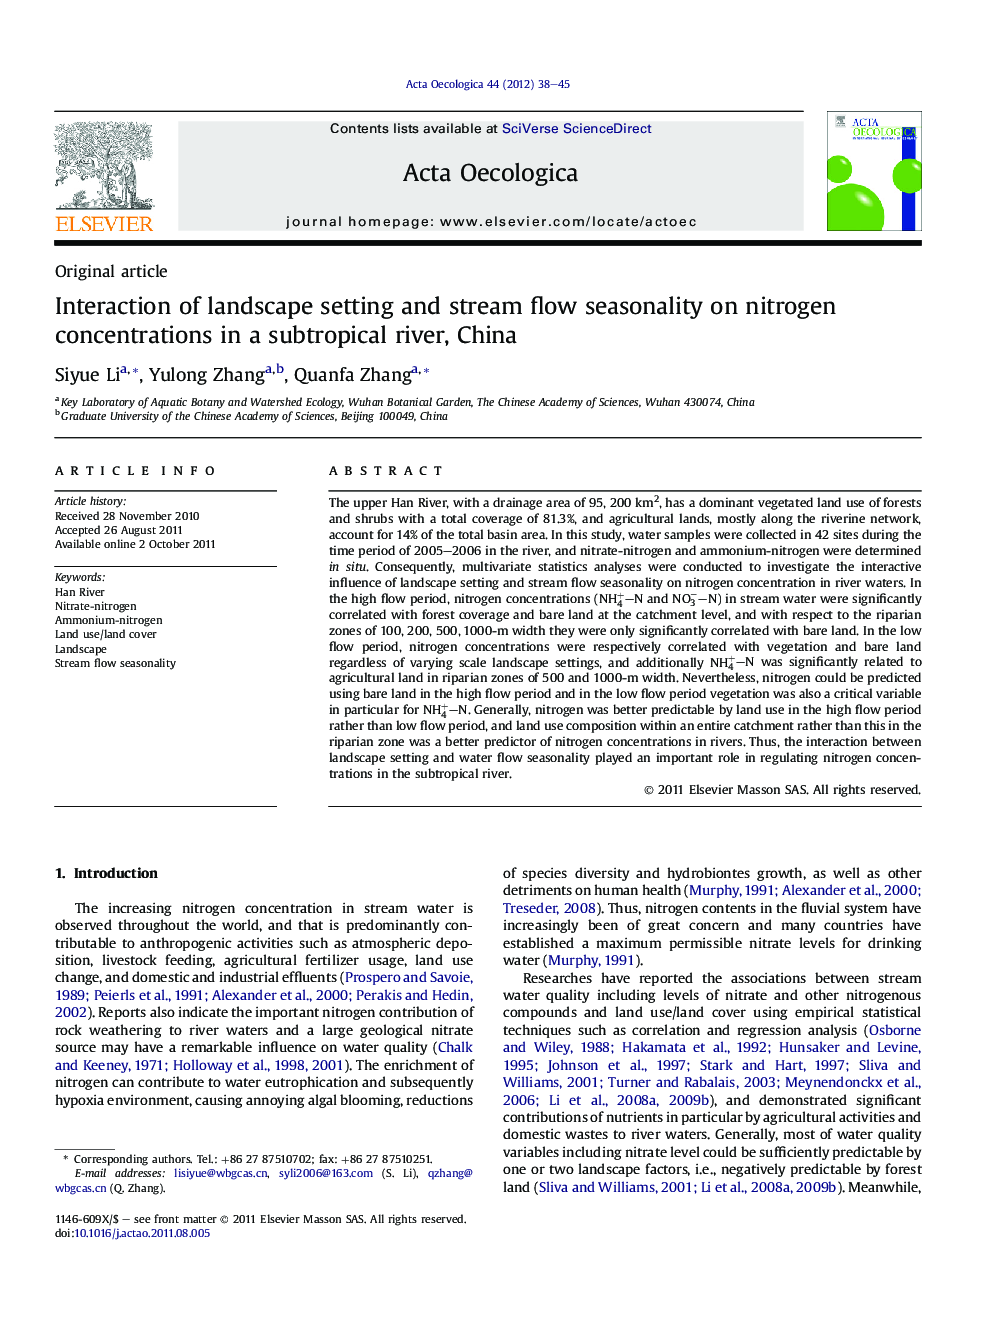 Interaction of landscape setting and stream flow seasonality on nitrogen concentrations in a subtropical river, China